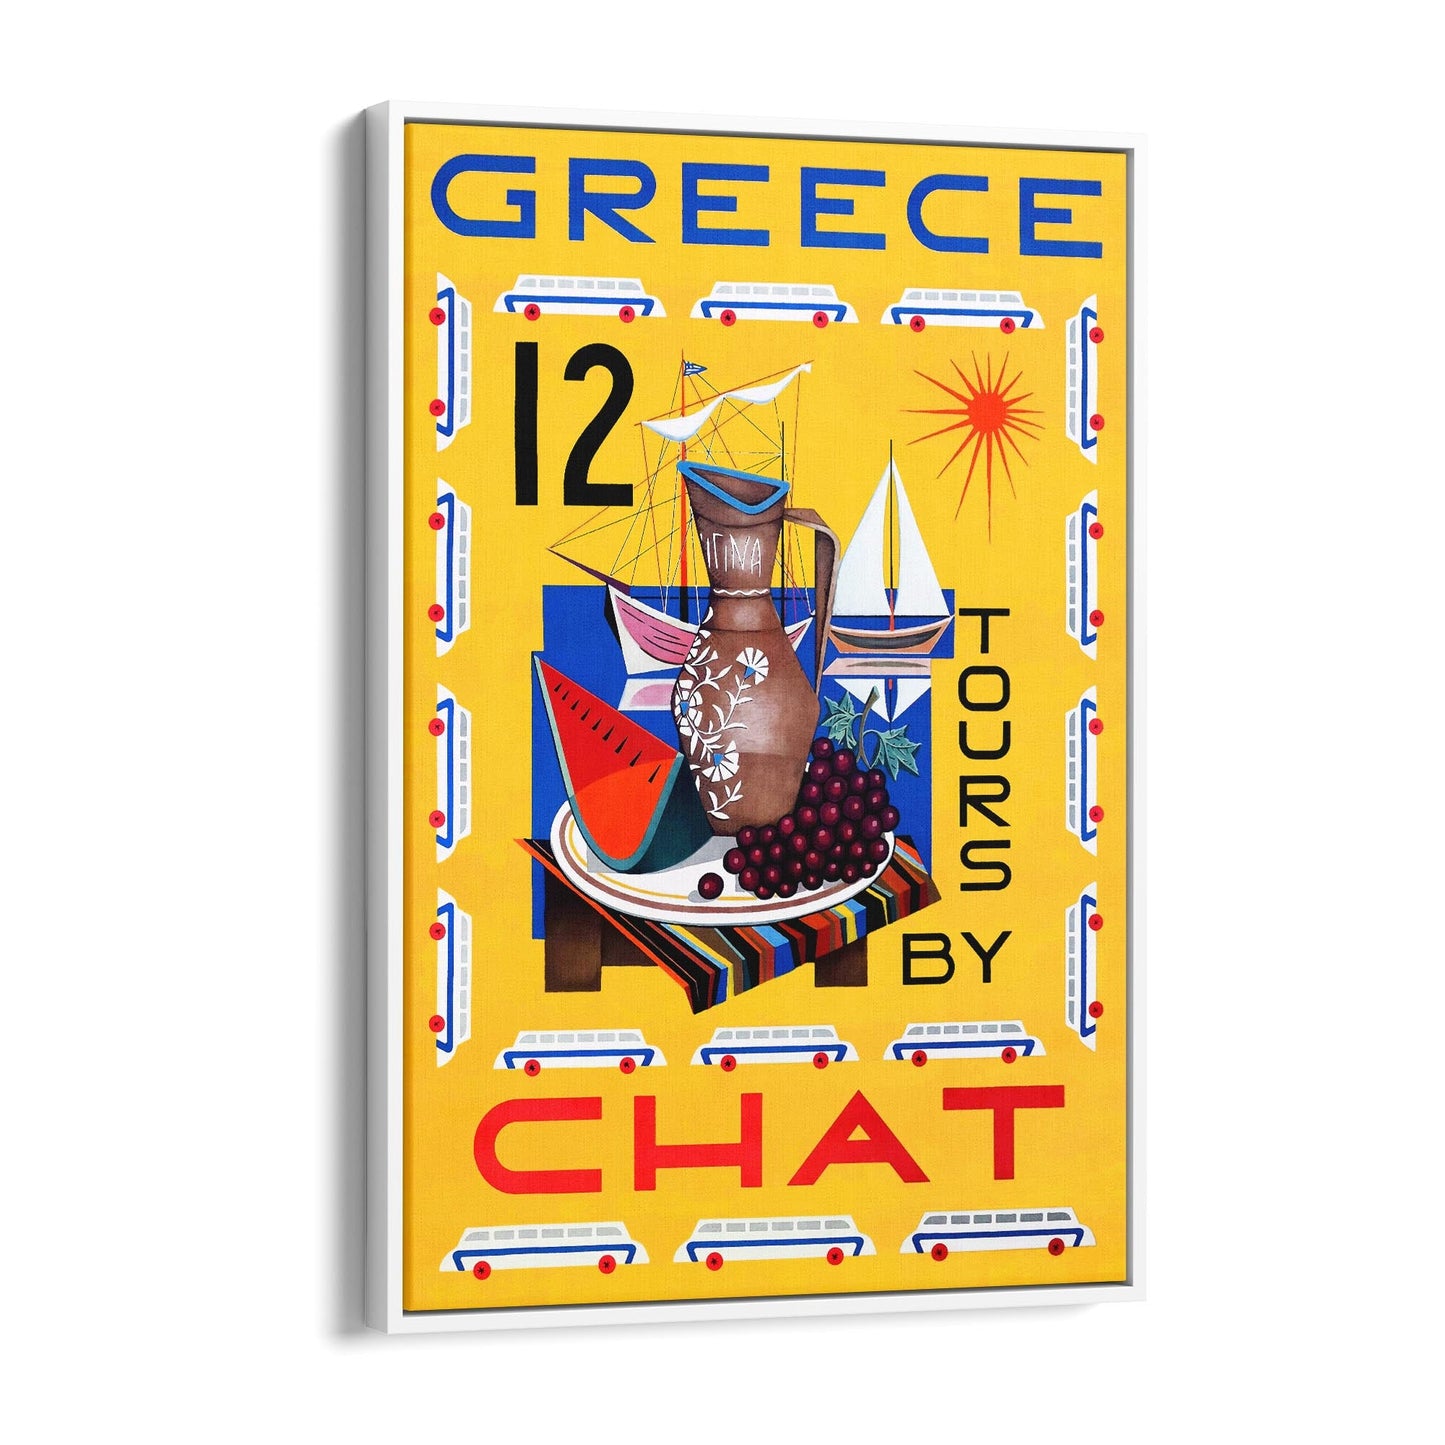 Greece Tours by Chat | Framed Canvas Vintage Travel Advertisement